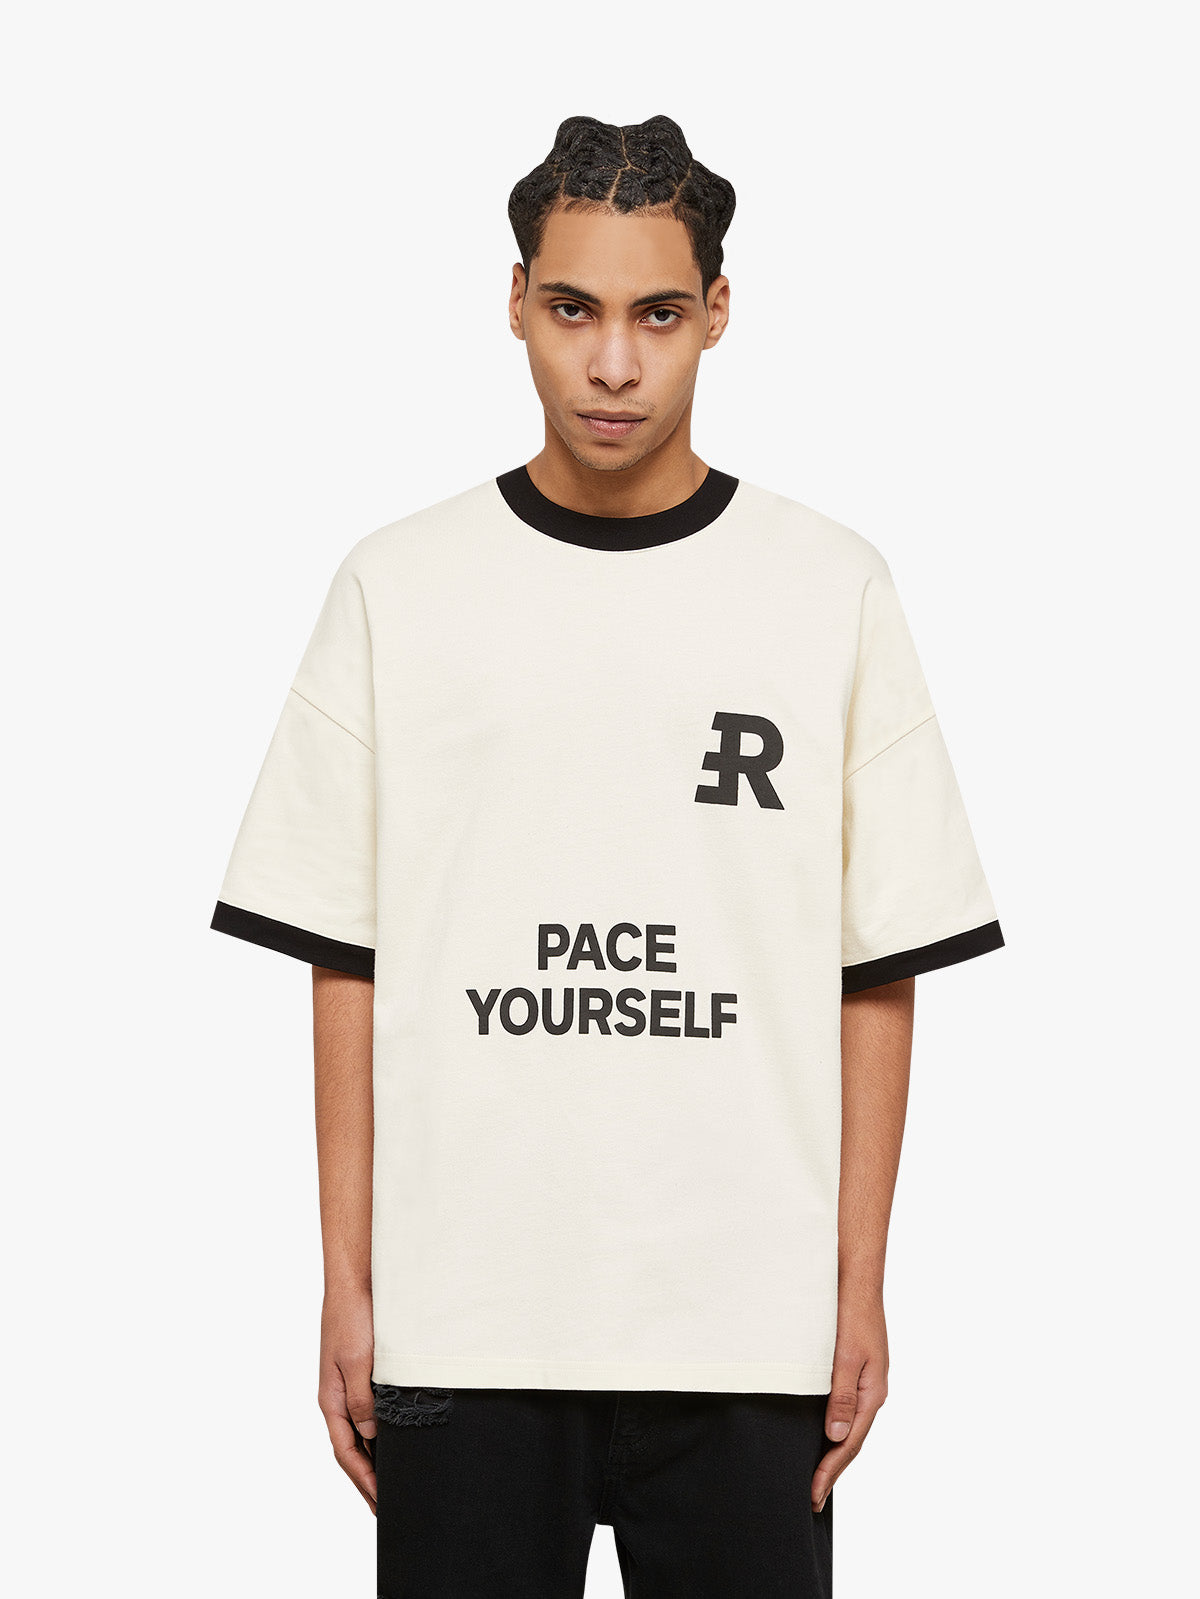 T-SHIRT PACE YOURSELF - IVORY/BLACK